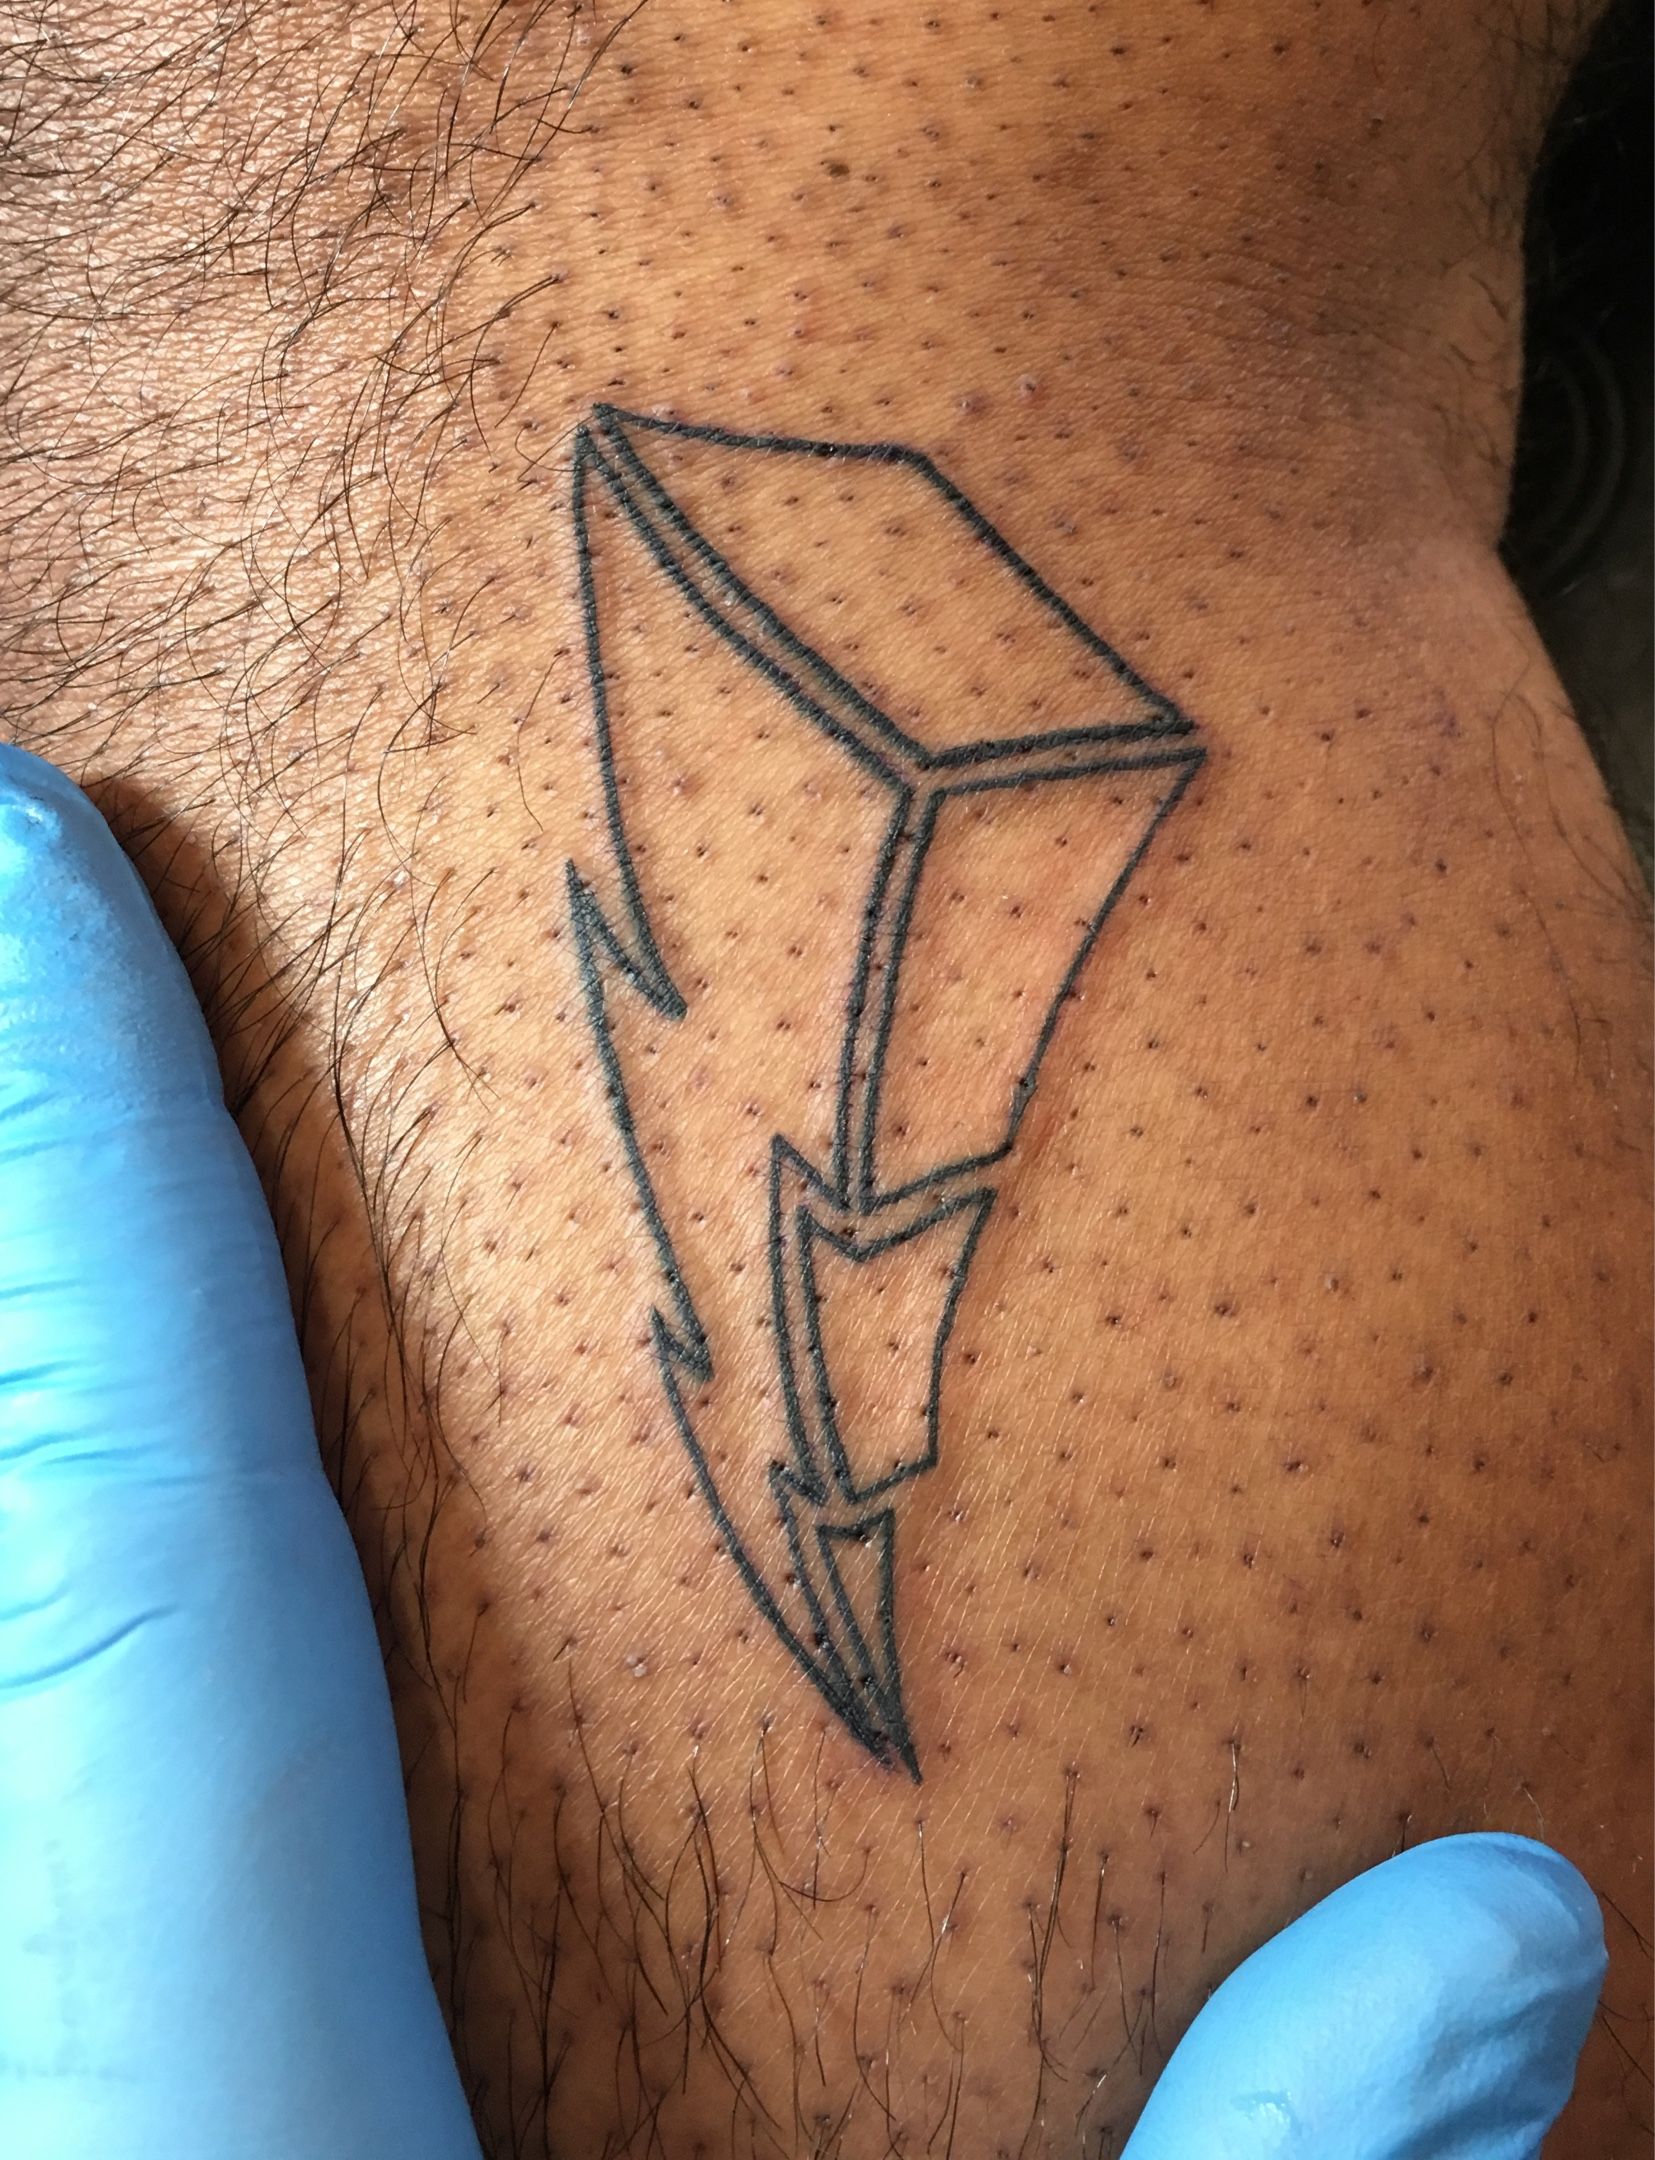 Lightning Bolt Tattoos: The Meaning Behind Them | The Skull and Sword